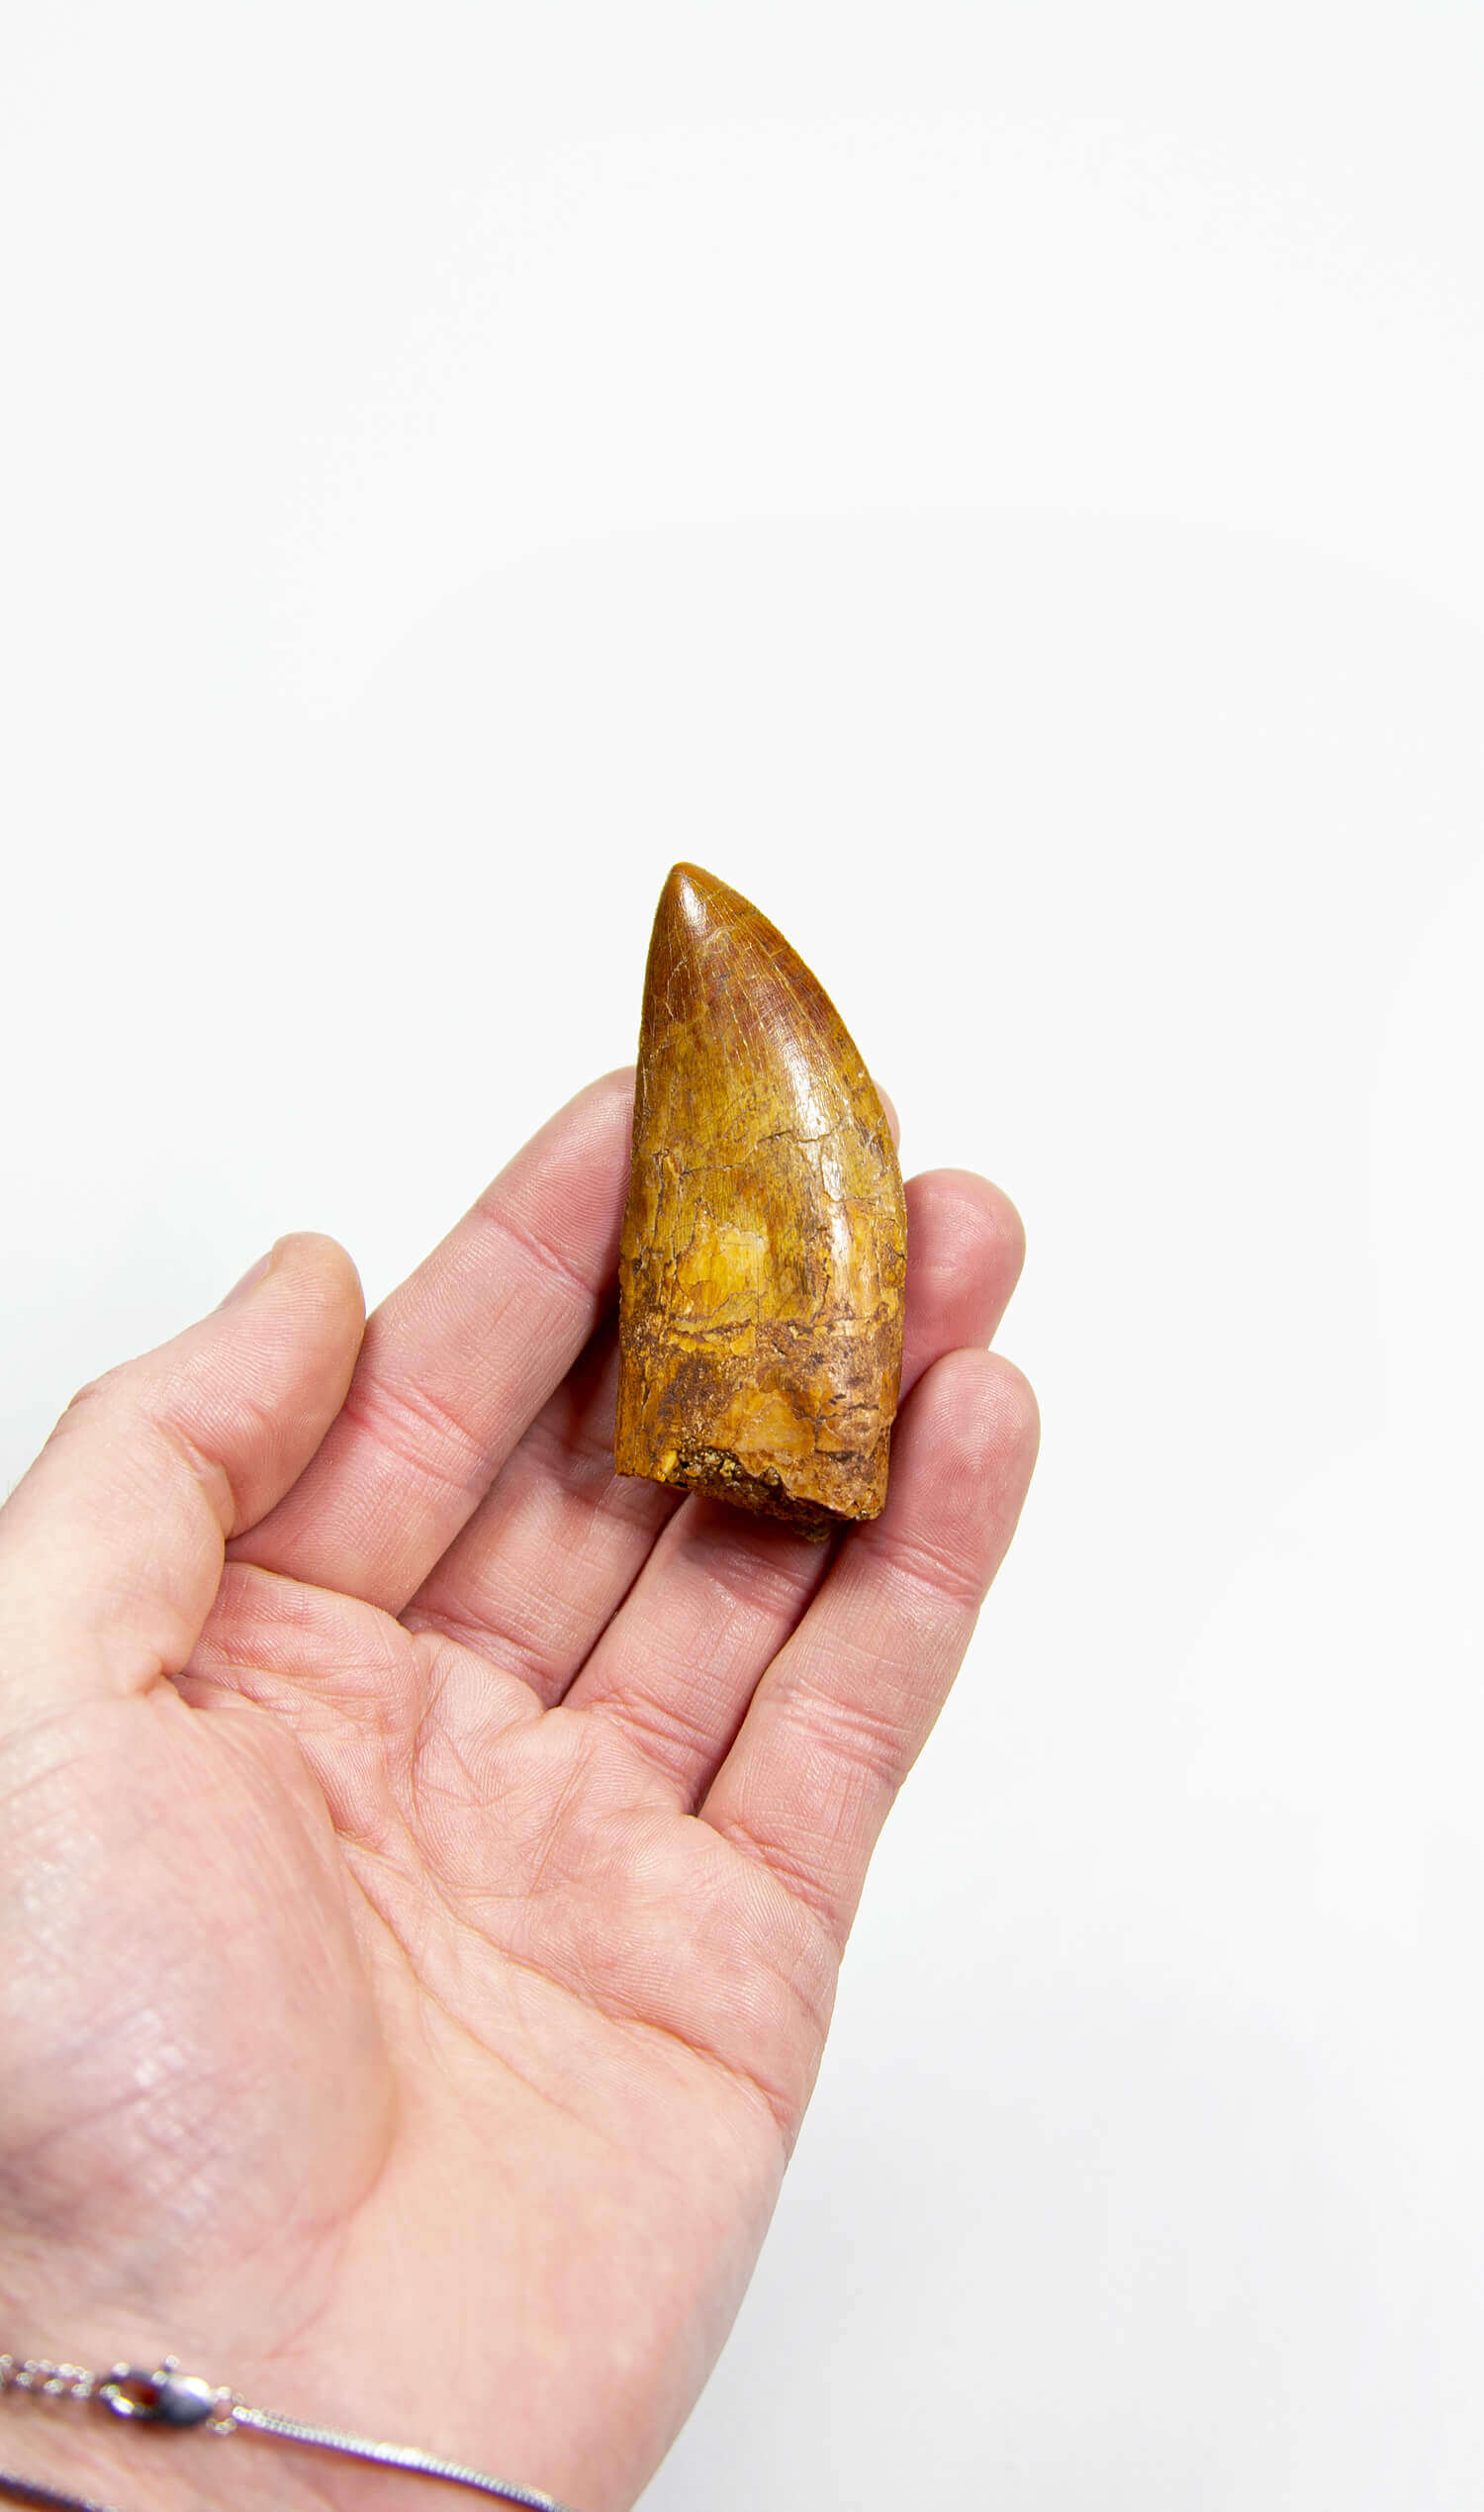 real fossil dinosaur carcharodontosaurus tooth for sale at the uk fossil store 51